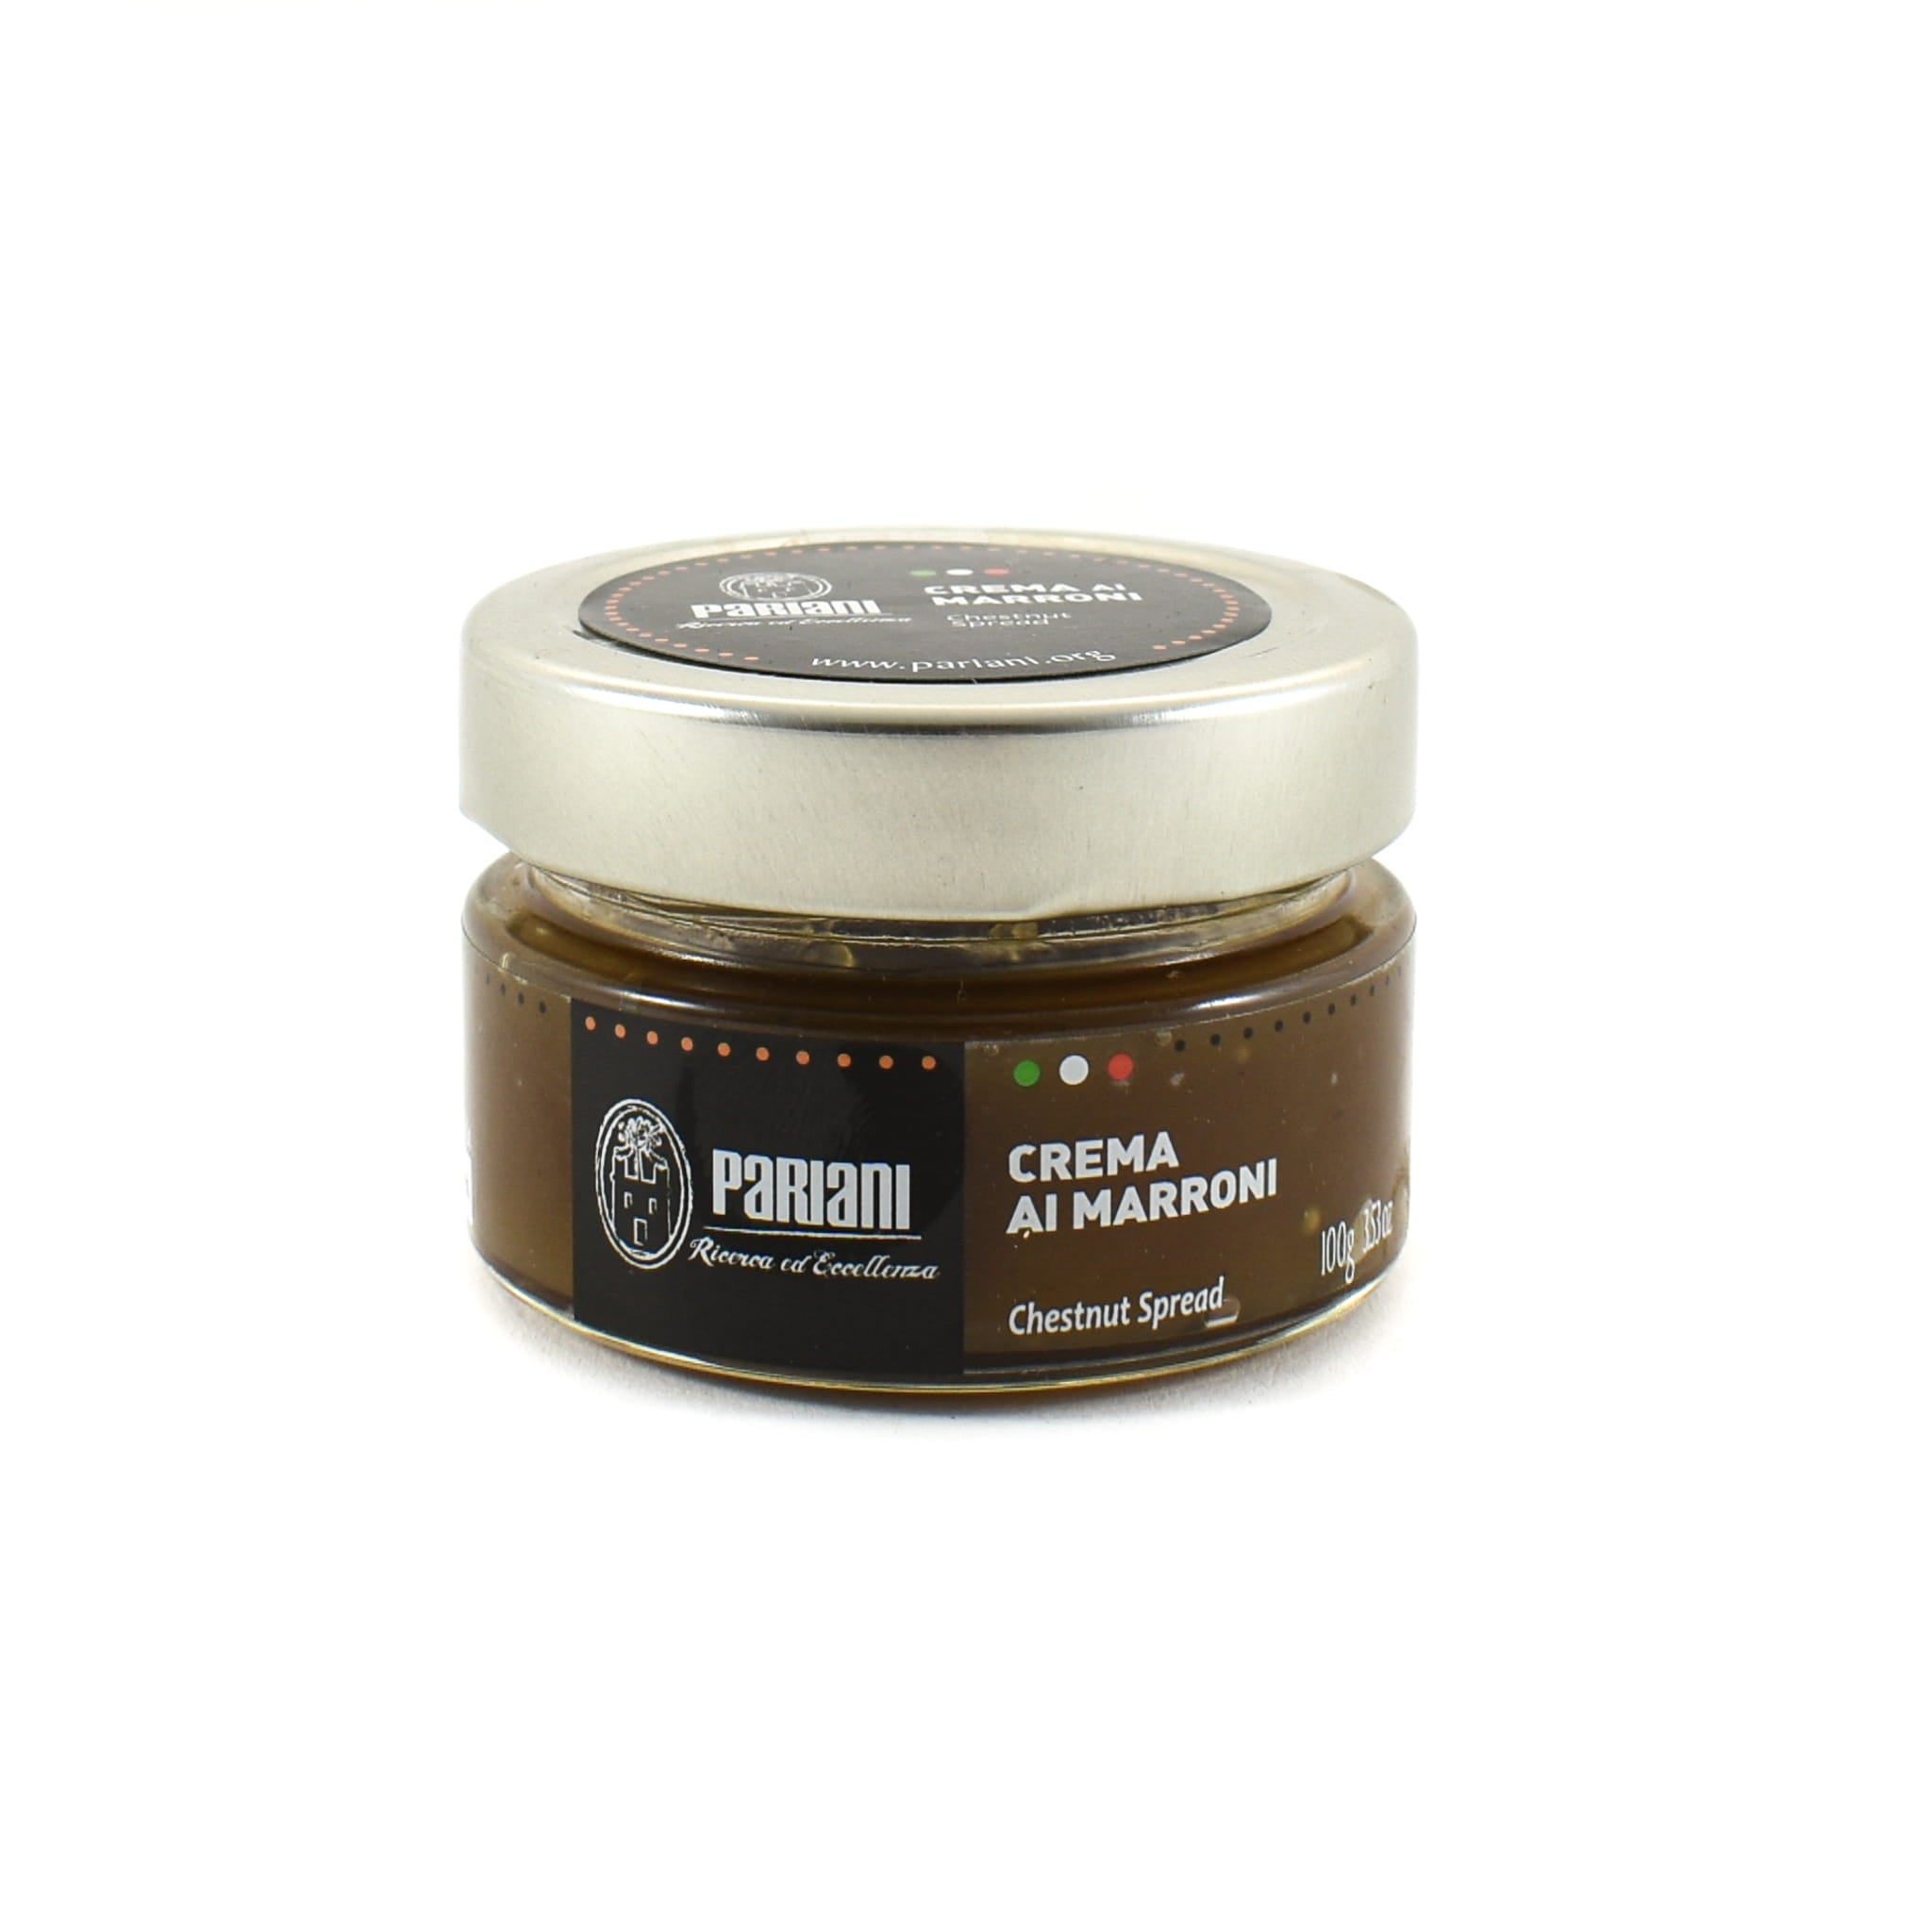 Pariani Chestnut Spread 100g front of pack